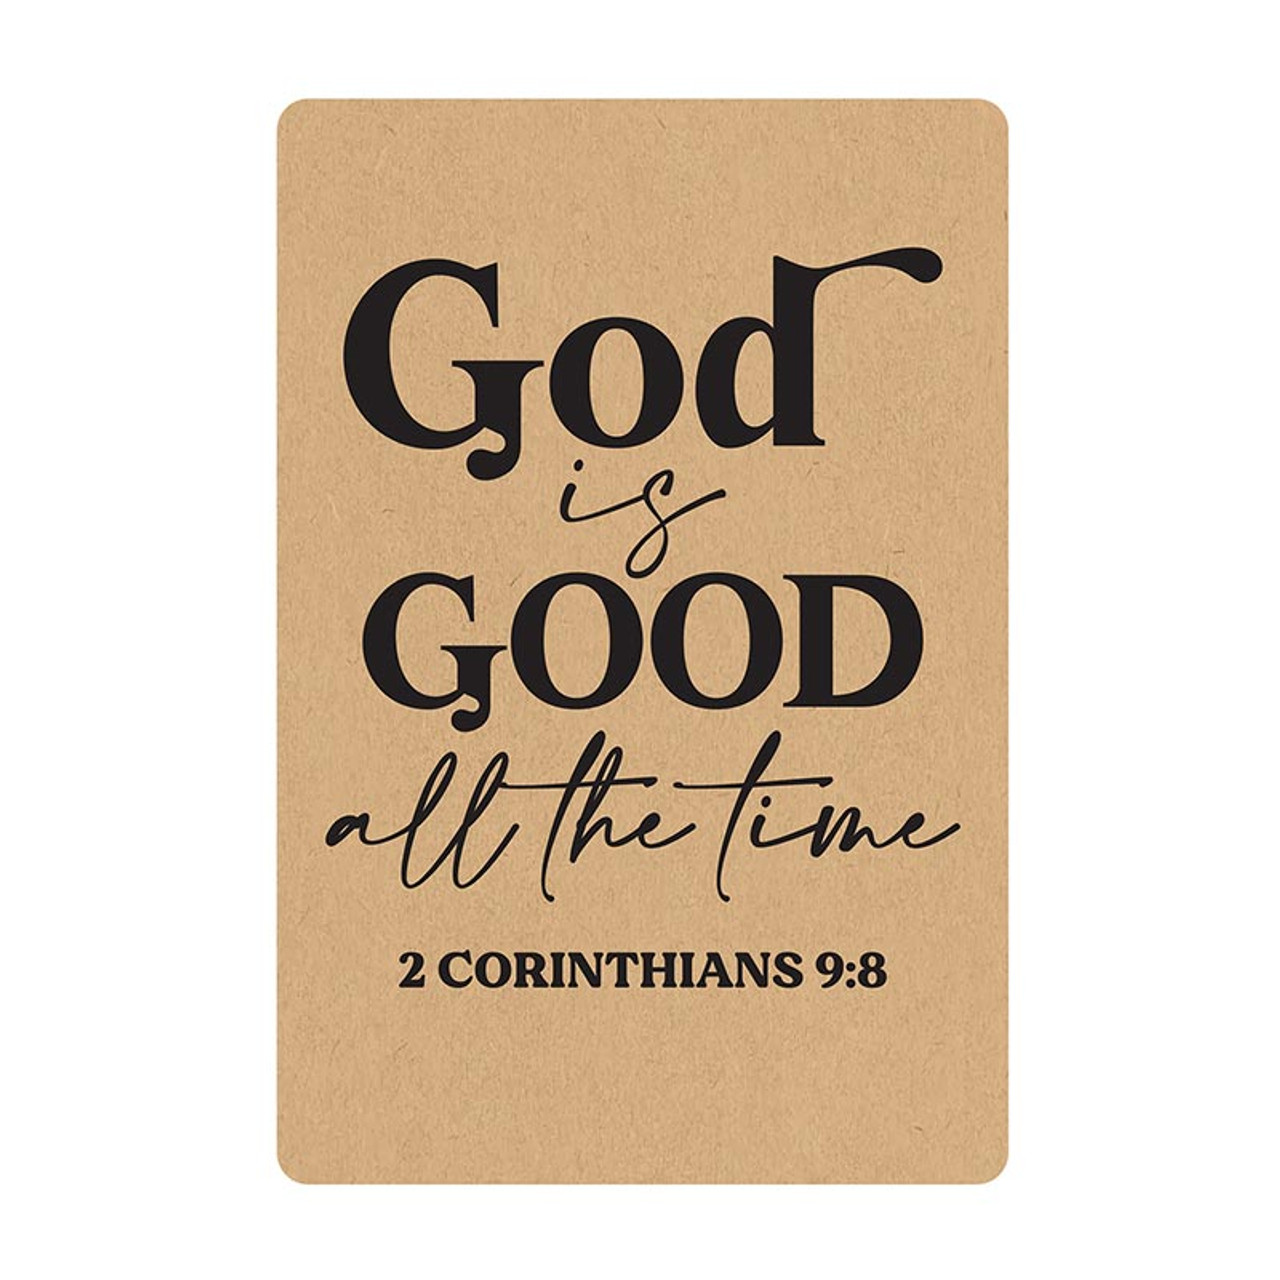 God is Good All the Time Hand Sanitizer Key Chain - 6/pk - Living Grace